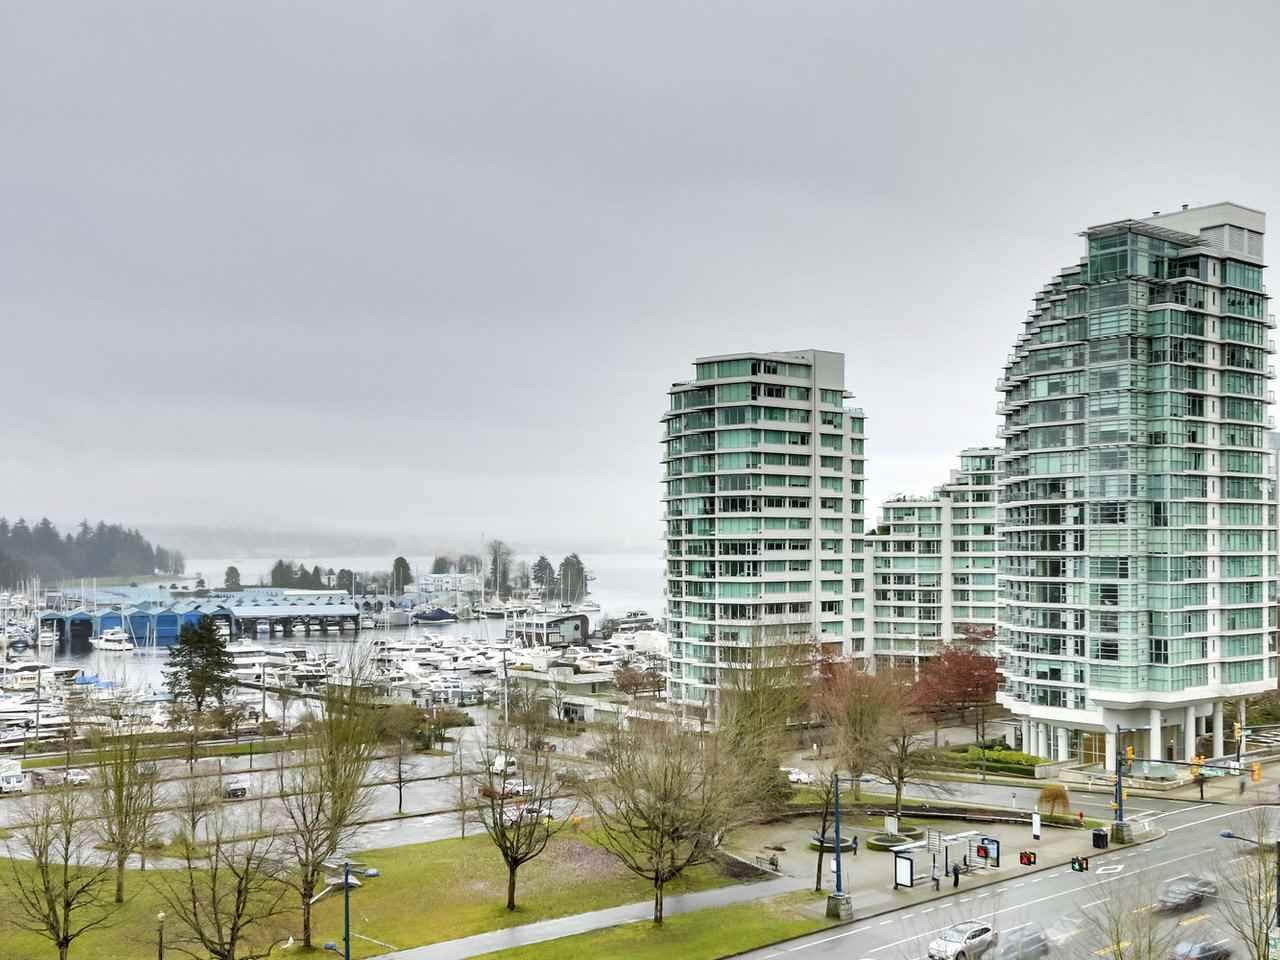 Main Photo: 1006 1889 AlberniL Street in Vancouver: West End VW Condo for sale (Vancouver West)  : MLS®# R2527613 